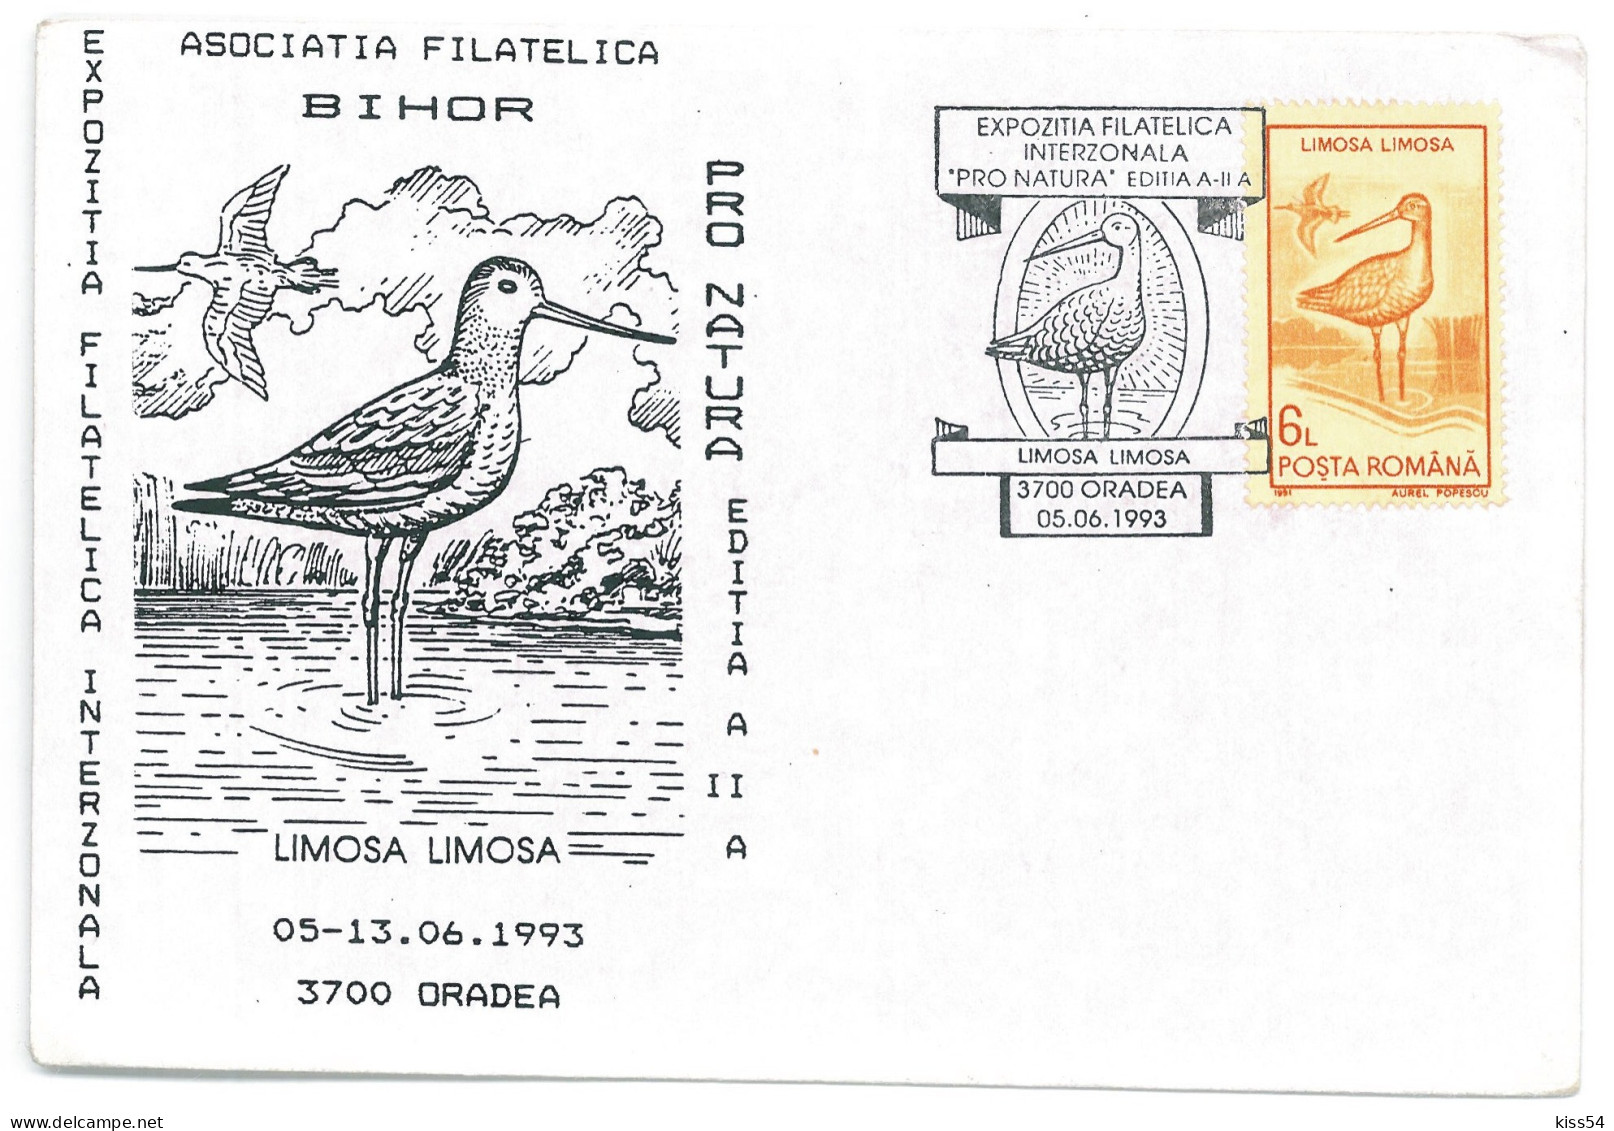 COV 995 - 3129 BIRD, Romania - Cover - Used - 1993 - Covers & Documents